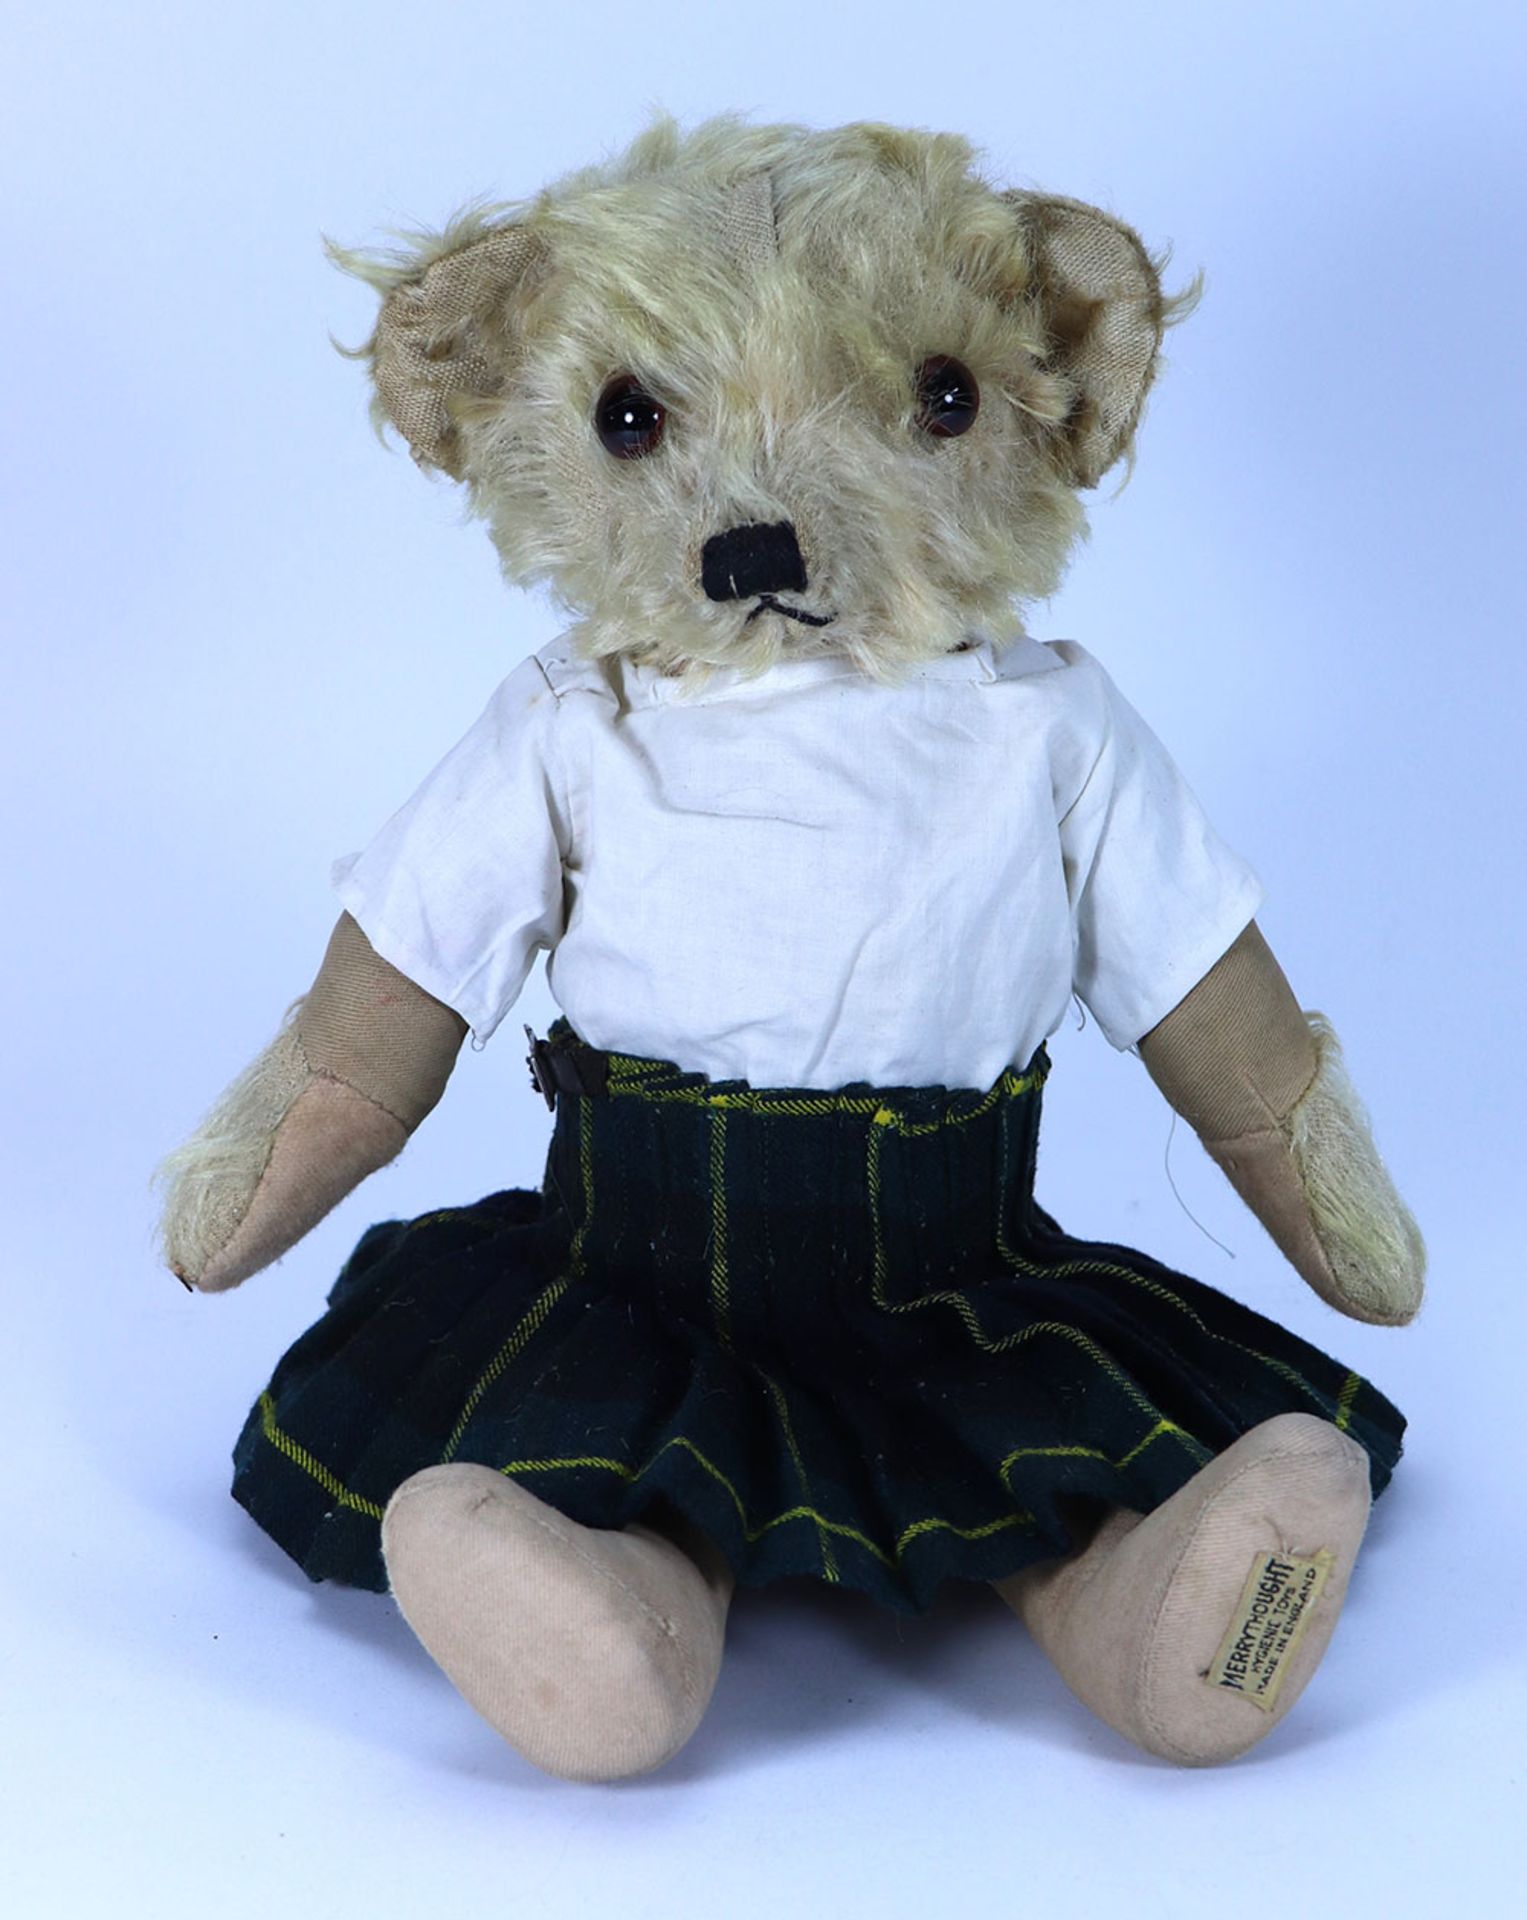 A scares Merrythought cotton bodied Bingie Teddy bear, 1930s,